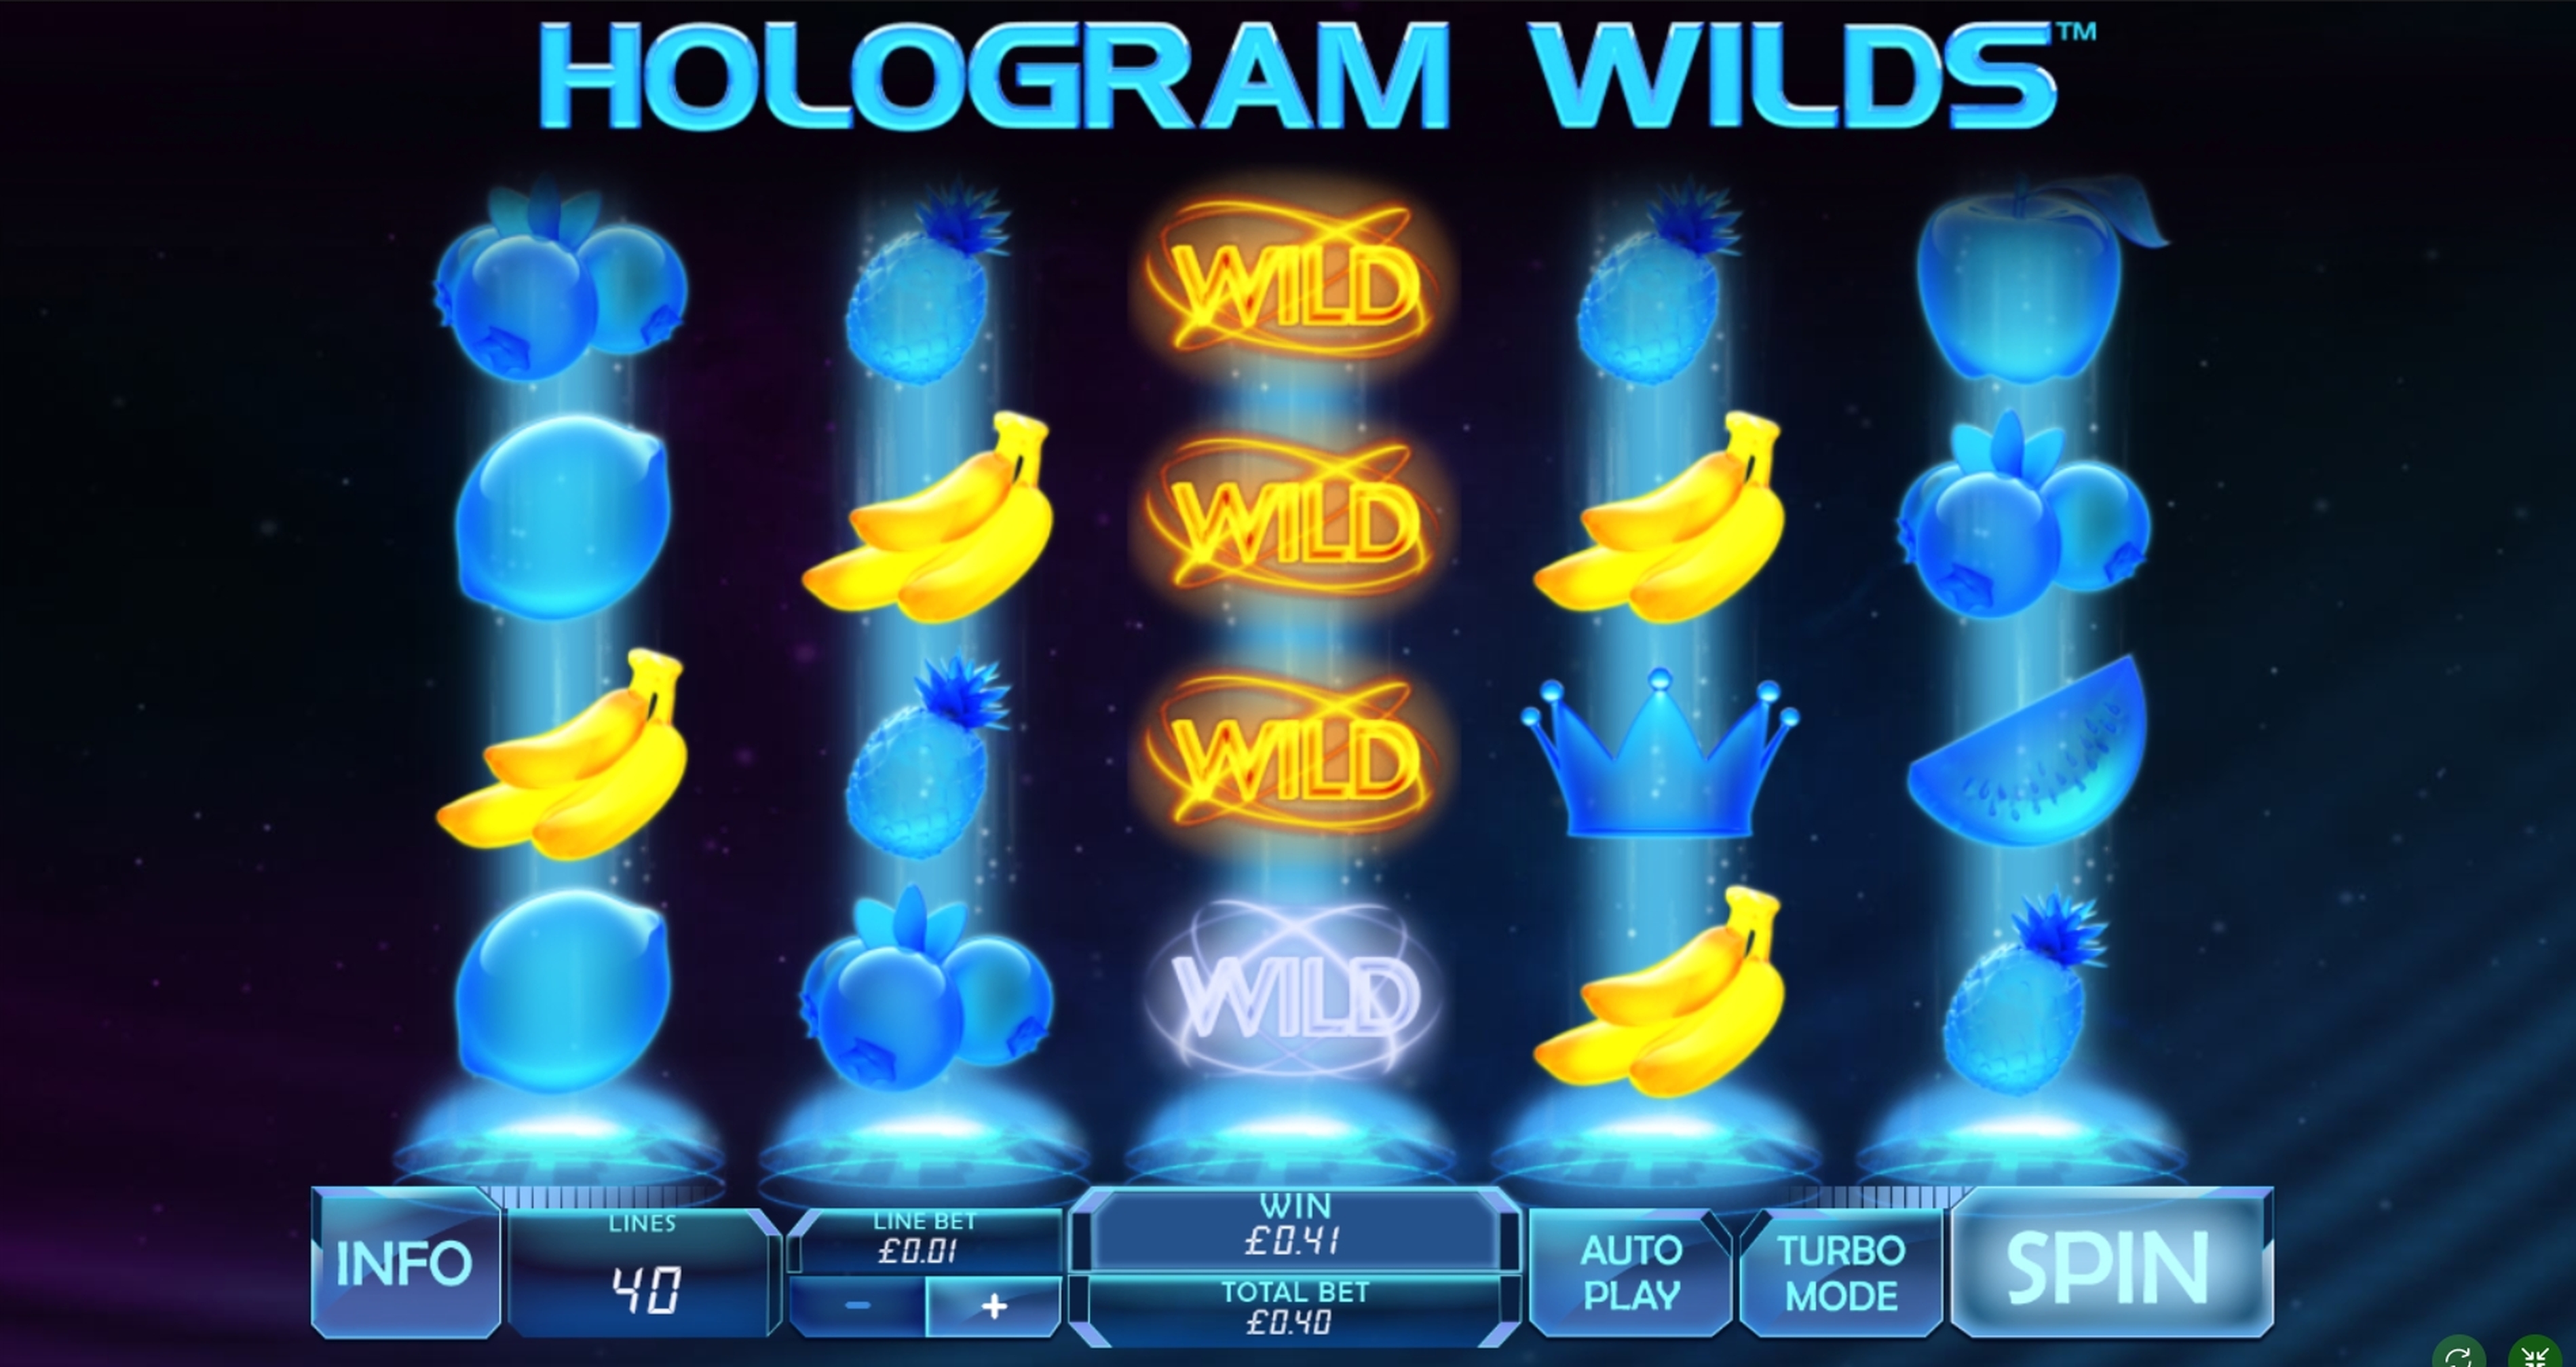 Win Money in Hologram Wilds Free Slot Game by Playtech